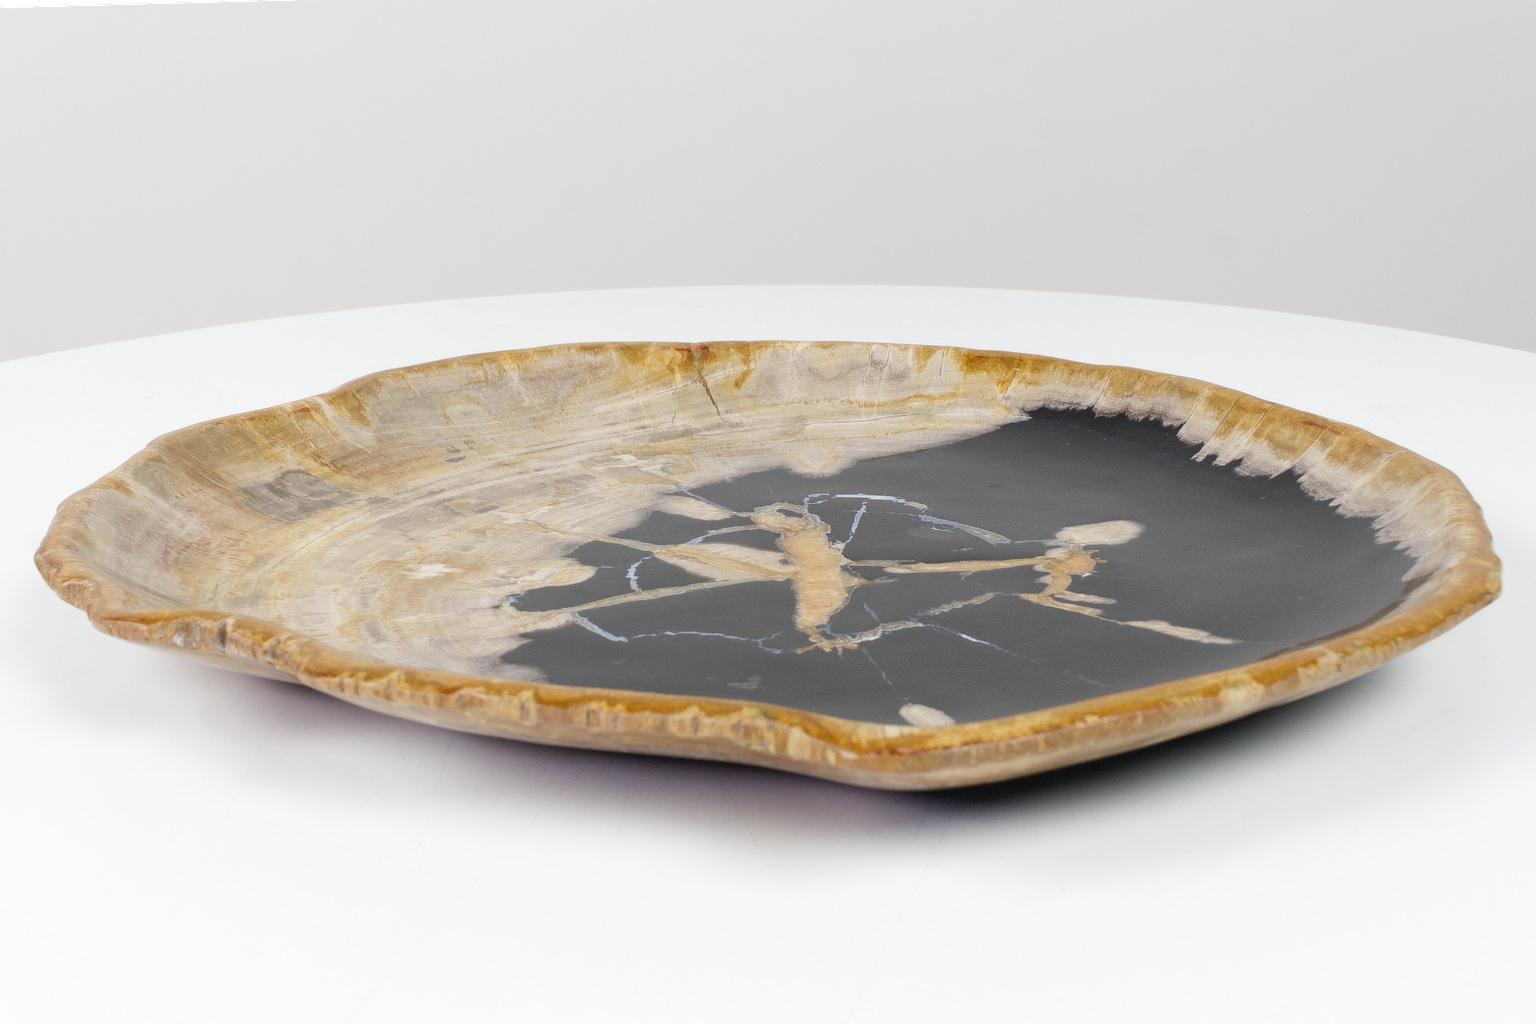 Large Black and Beige Petrified Wooden Platter, Accessory of Organic Origin In Excellent Condition For Sale In Beek en Donk, NL